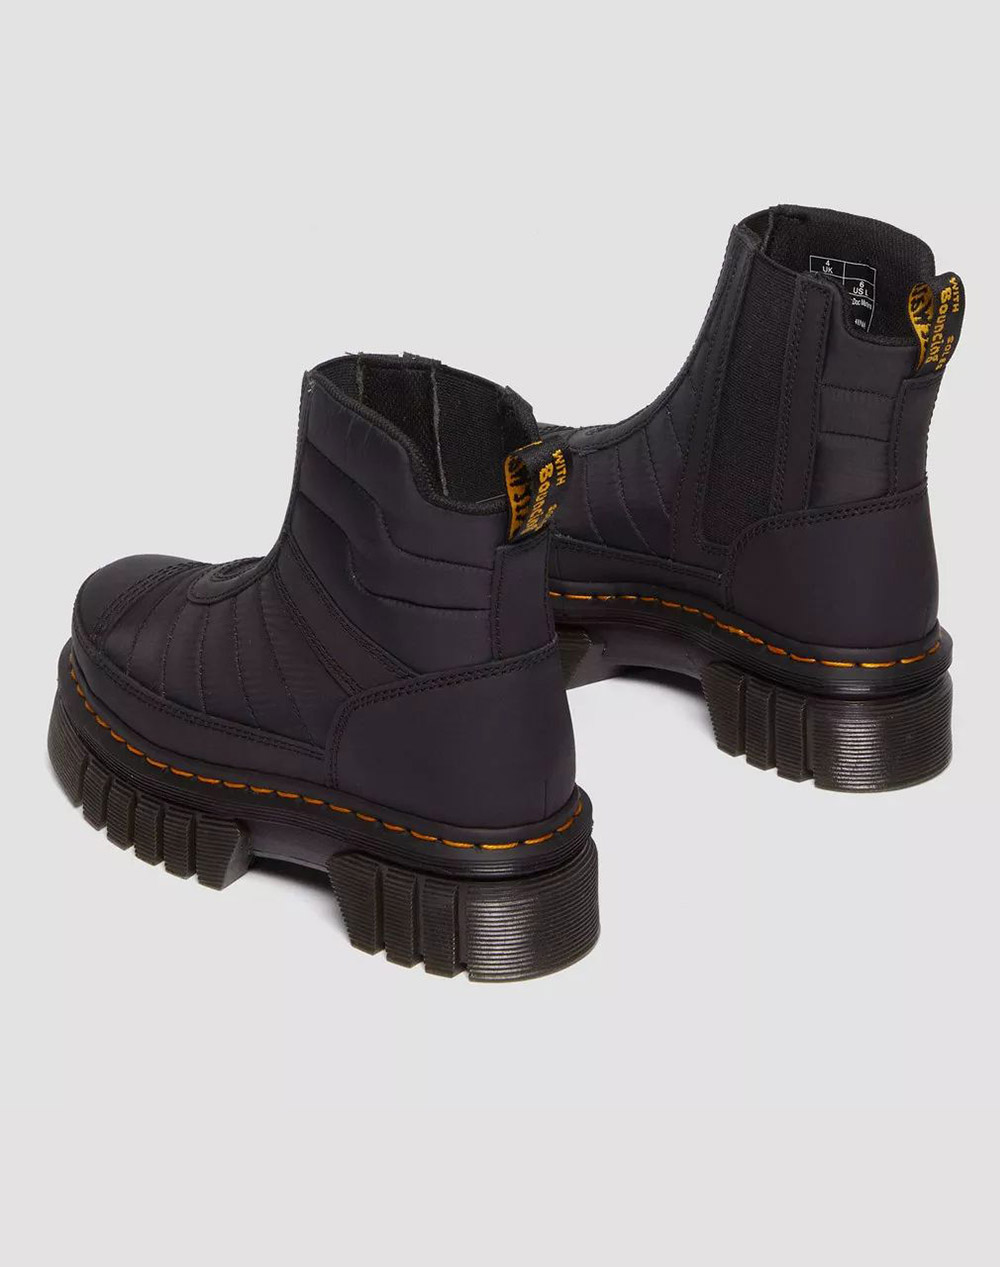 DR.MARTENS 30915001 Audrick Chelsea QLTD Rubberised Leather & Warm Quilted GHETUTE DR MARTENS